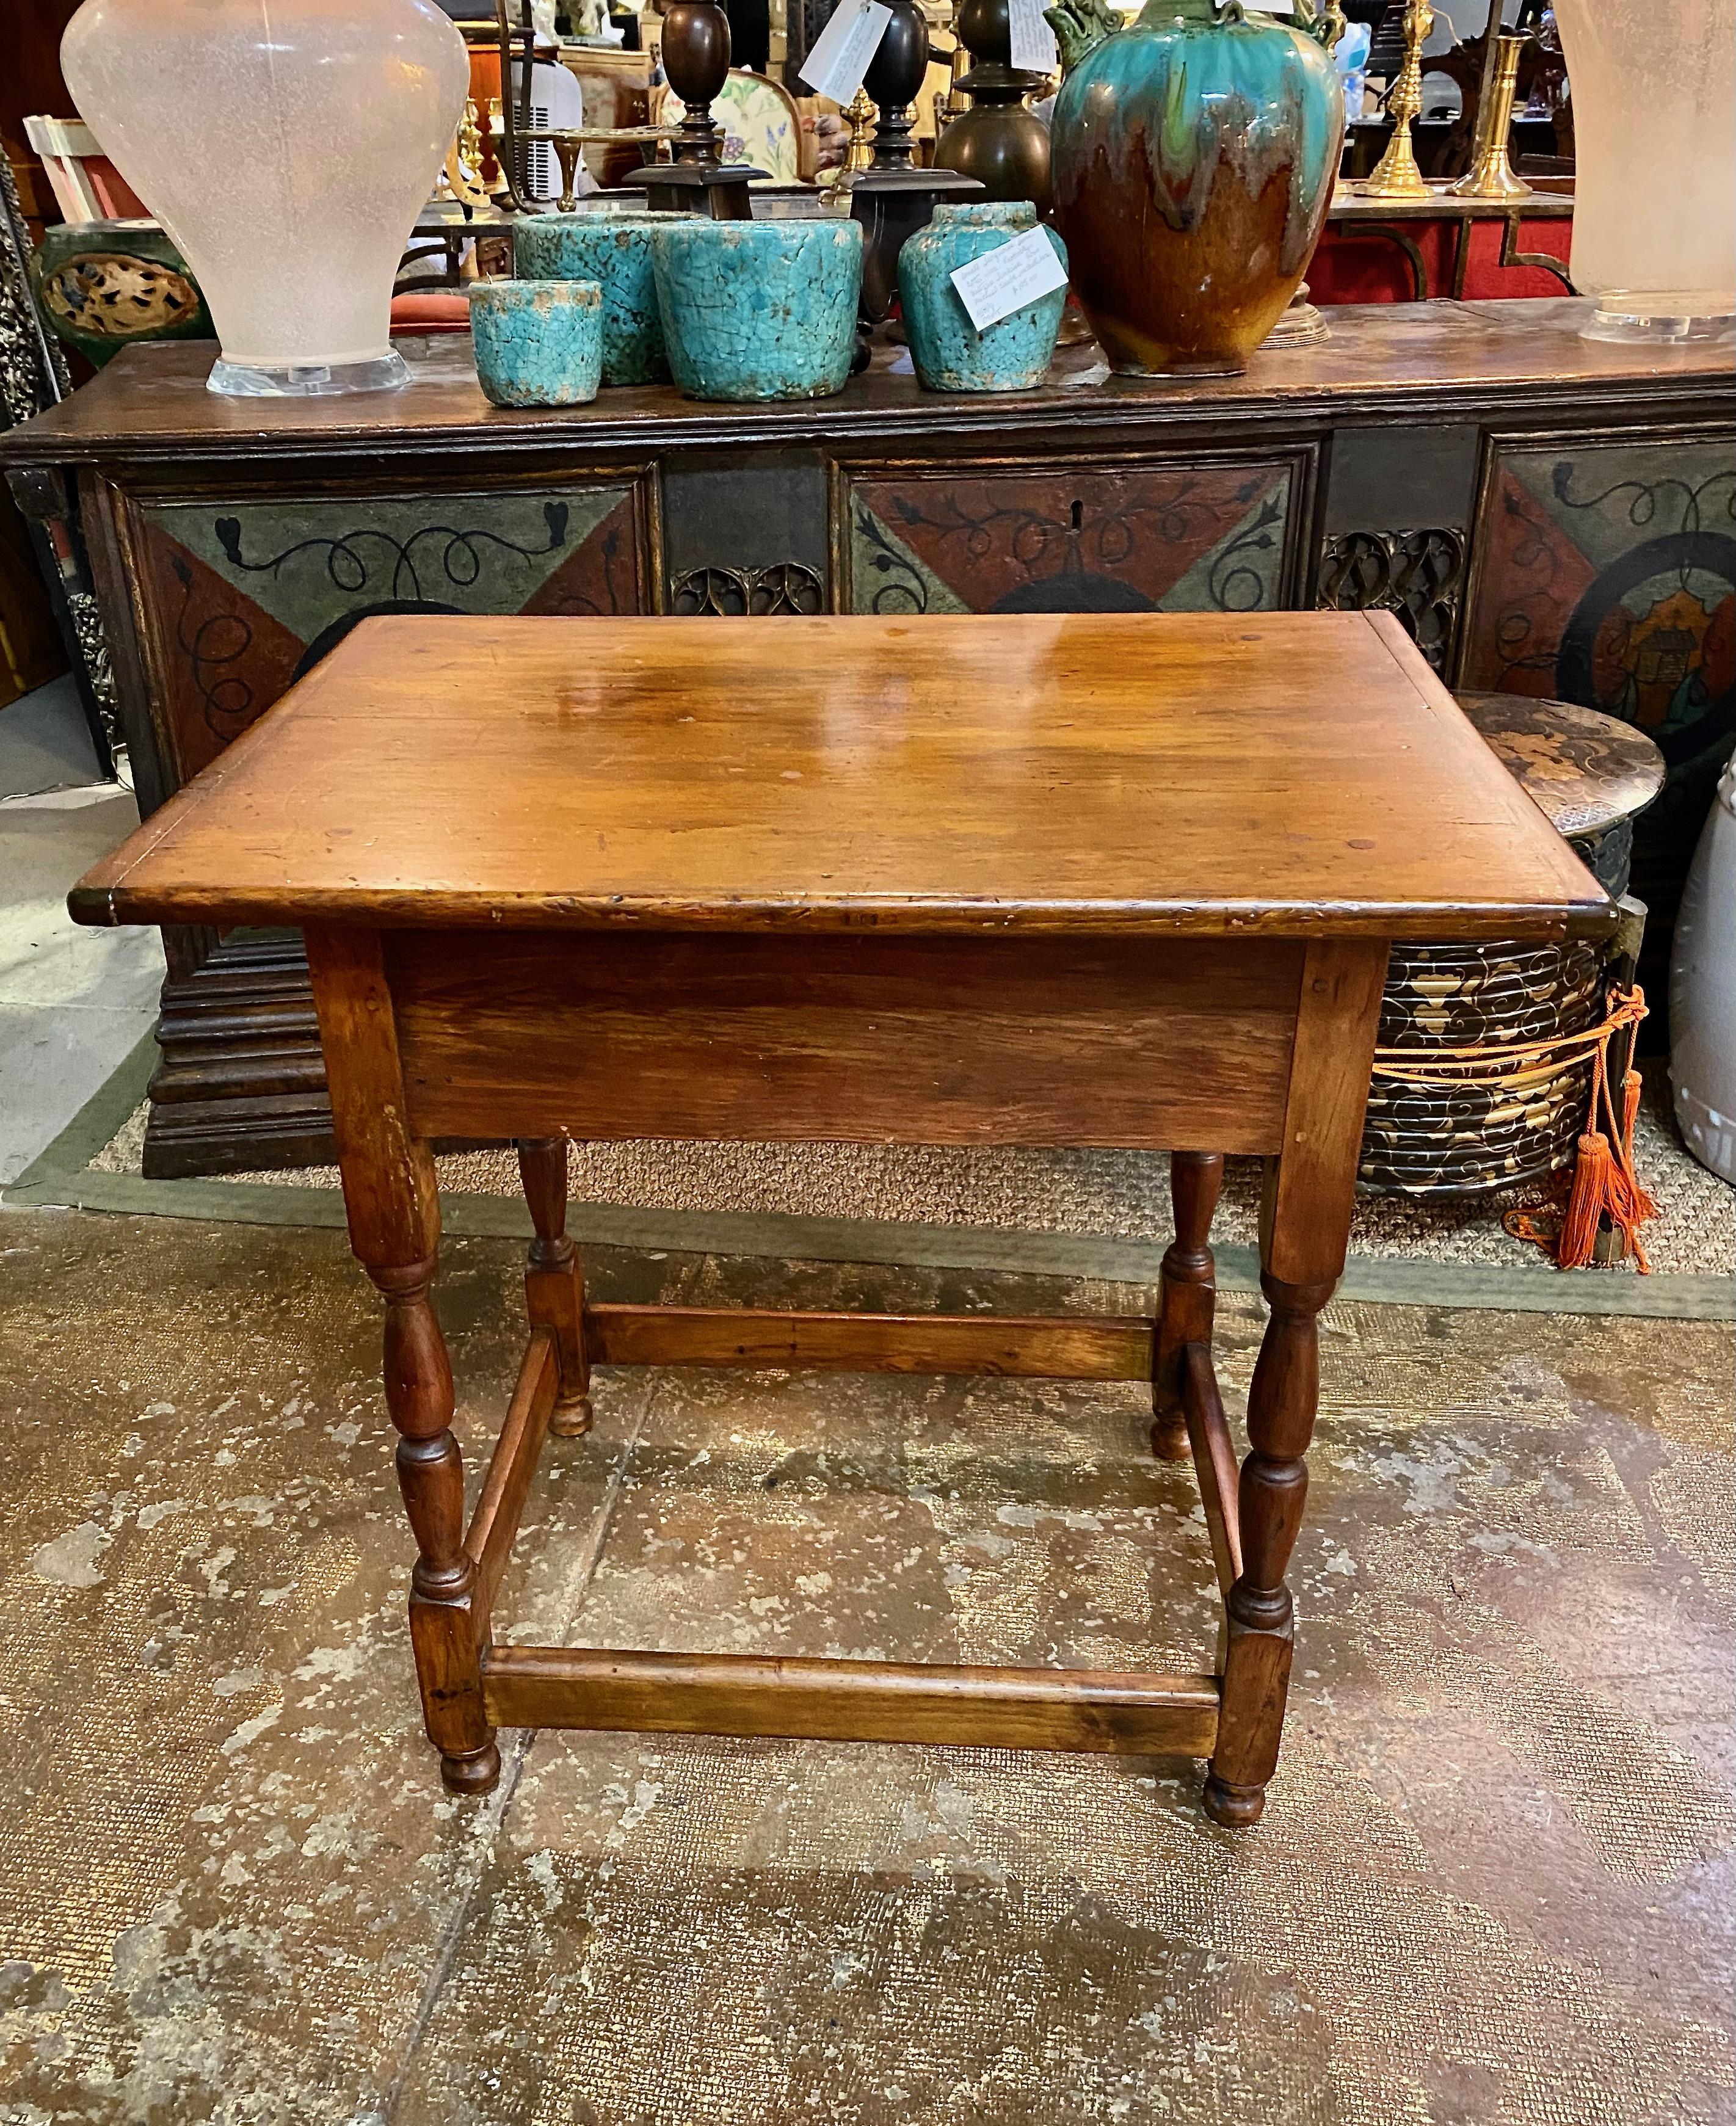 This is a charming New England small tavern table that dates to the latter part of the 18th century. The pine and maple table is in very good sturdy condition. It has an old surface and traces of the original black finish are present. The breadboard